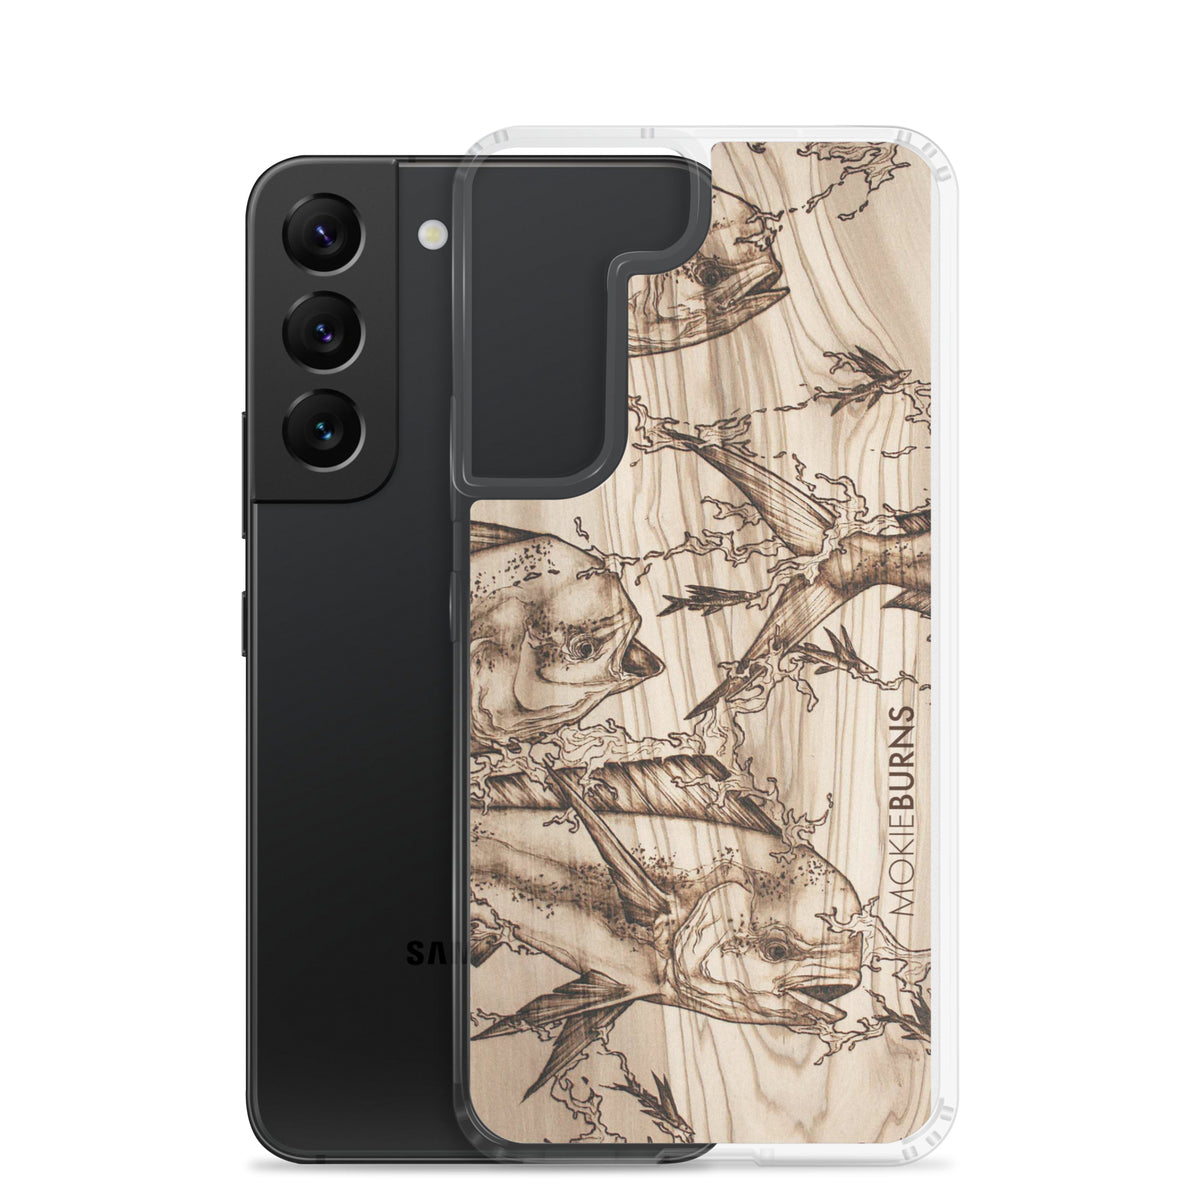 &quot;Brunch&quot; - Samsung Case [all sizes] - FREE SHIPPING